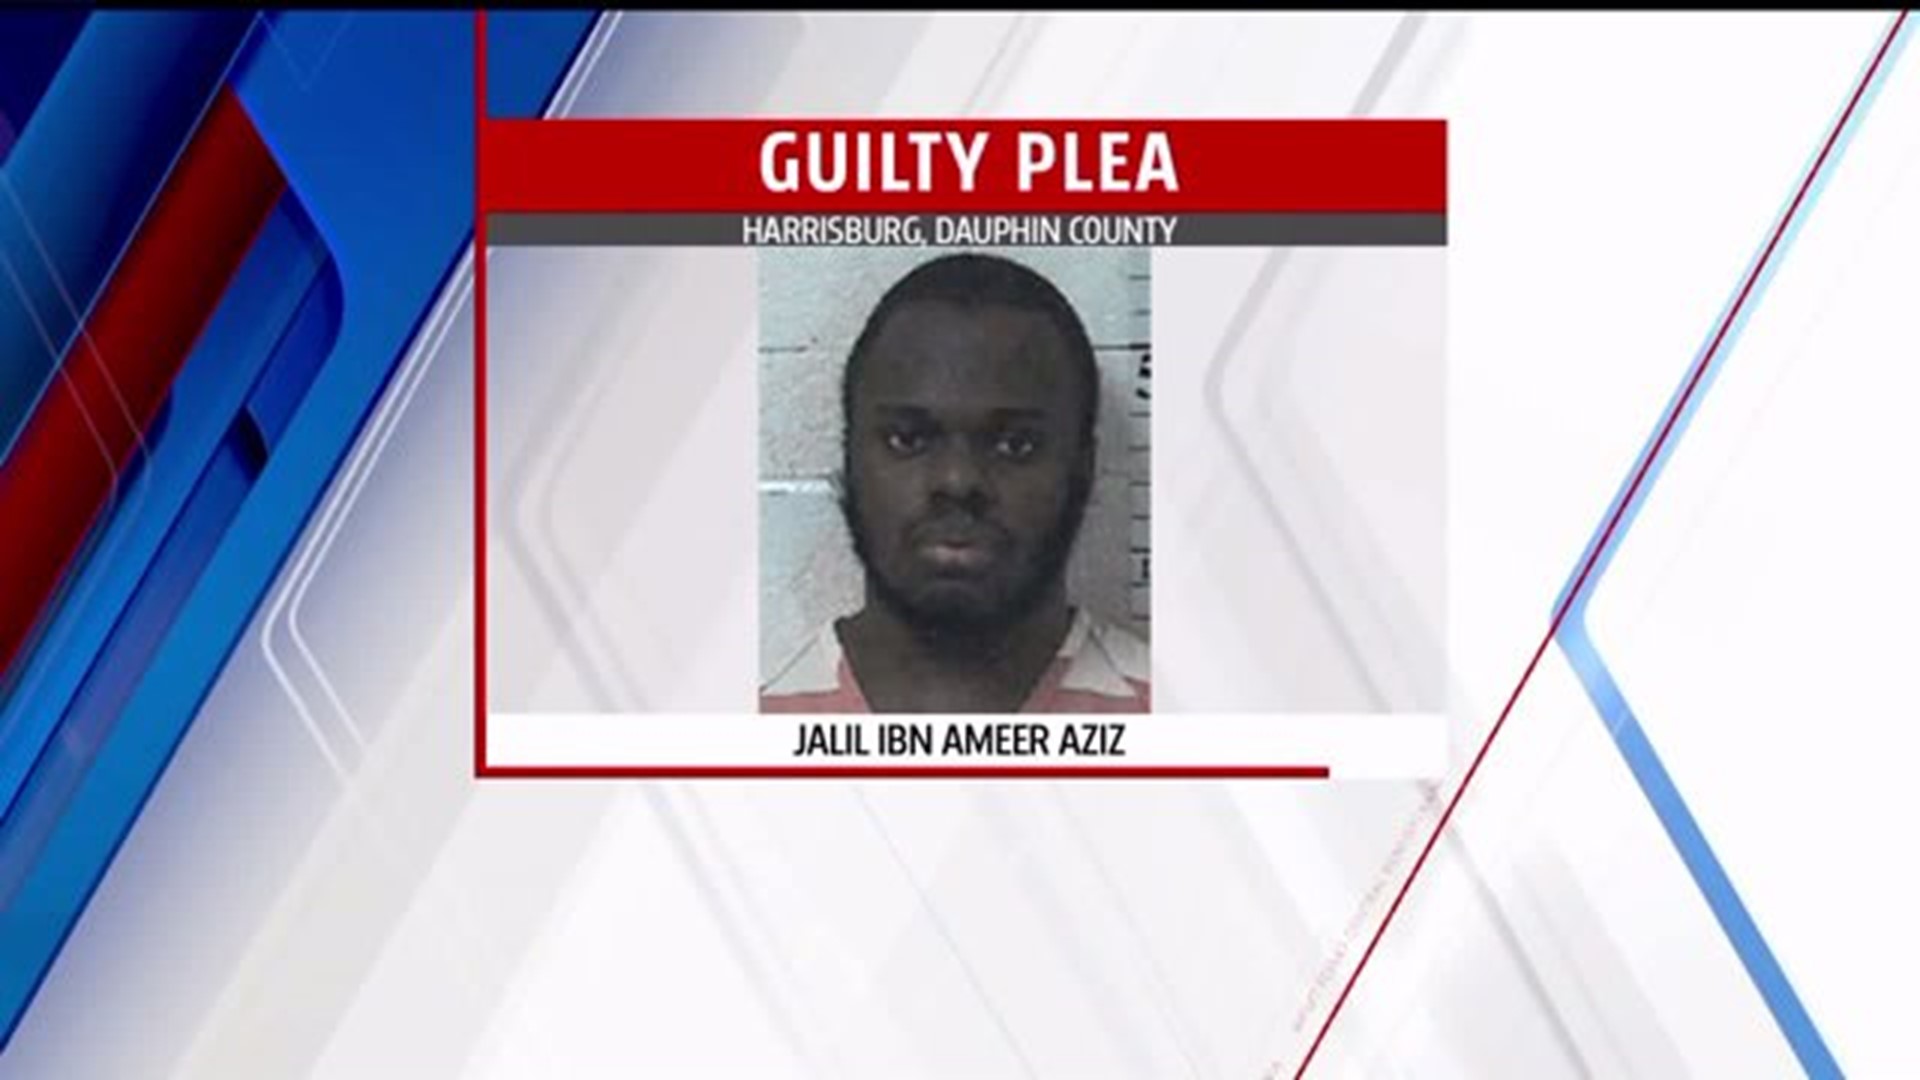 Jalil Aziz, of Harrisburg, pleads guilty to charges he provided material support to ISIS